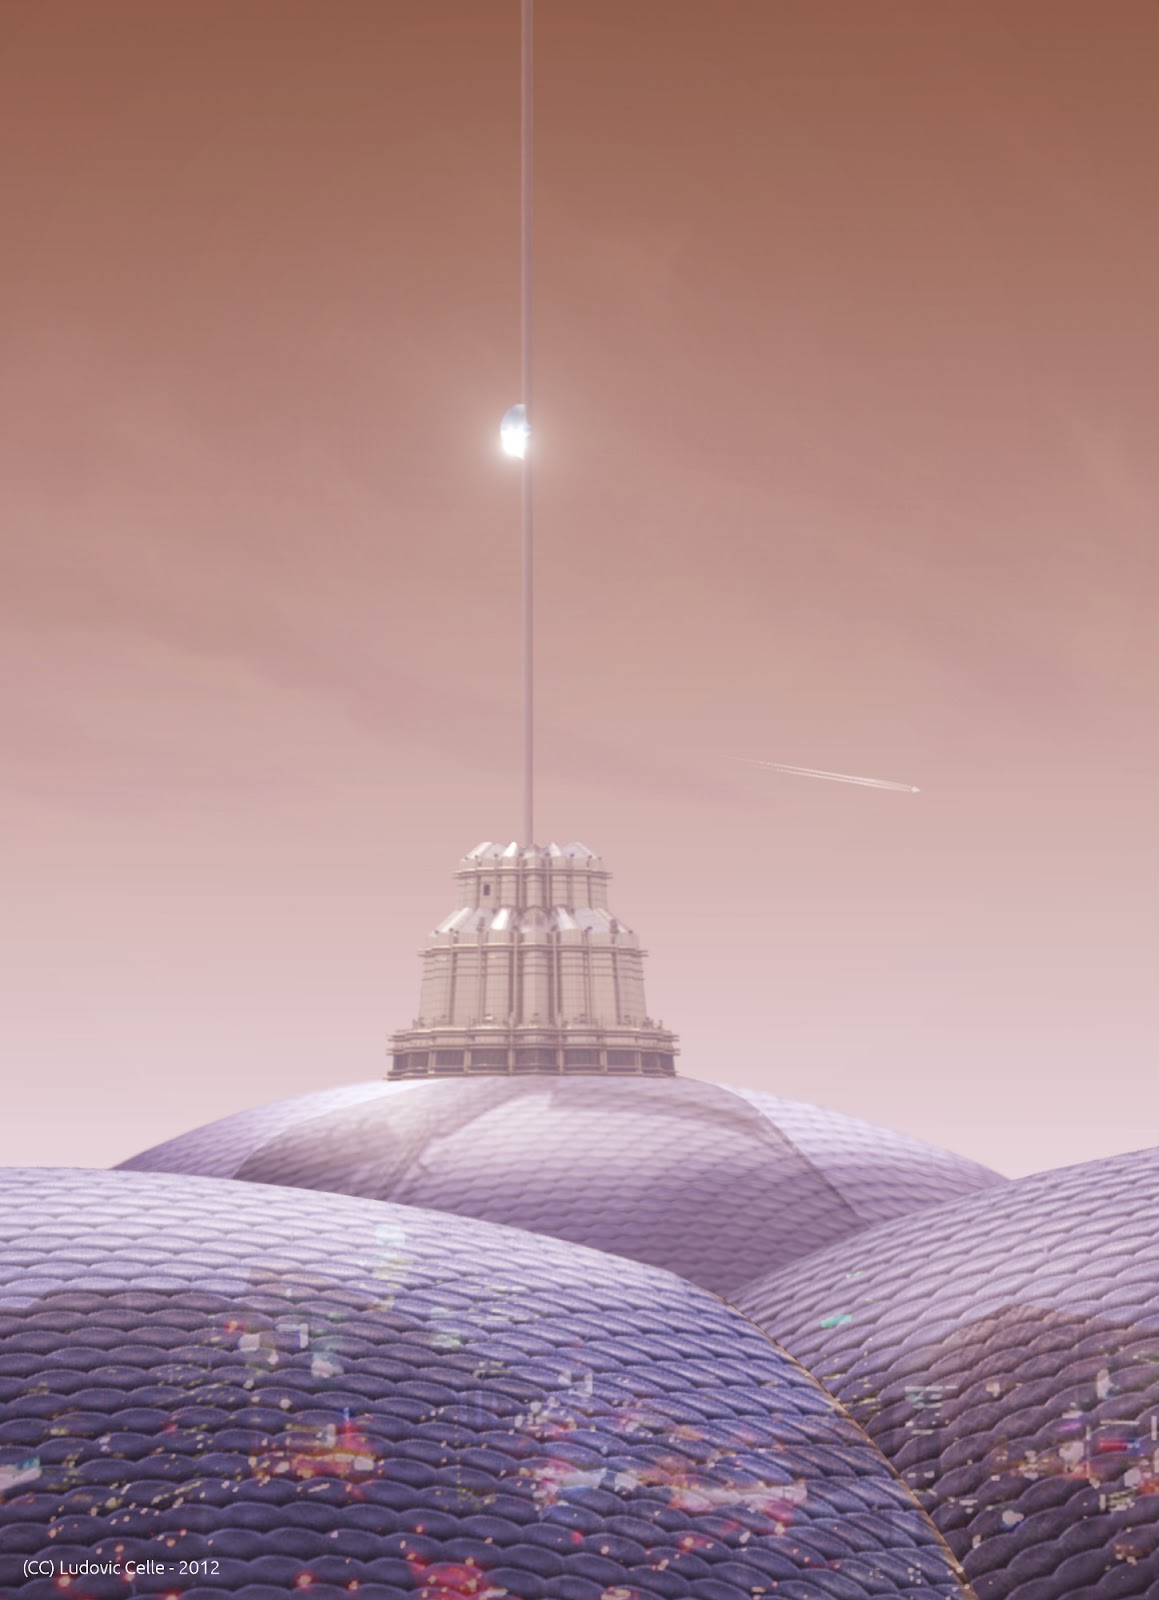  Artist’s impression of a space elevator connecting to the domed over city, Sheifeild, located on Pvonic Mons in Kim Robinson’s Mars trilogy. Images retrieved from:  http://davinci-marsdesign.blogspot.com/2012/04/sheffield-and-space-elevator.html  